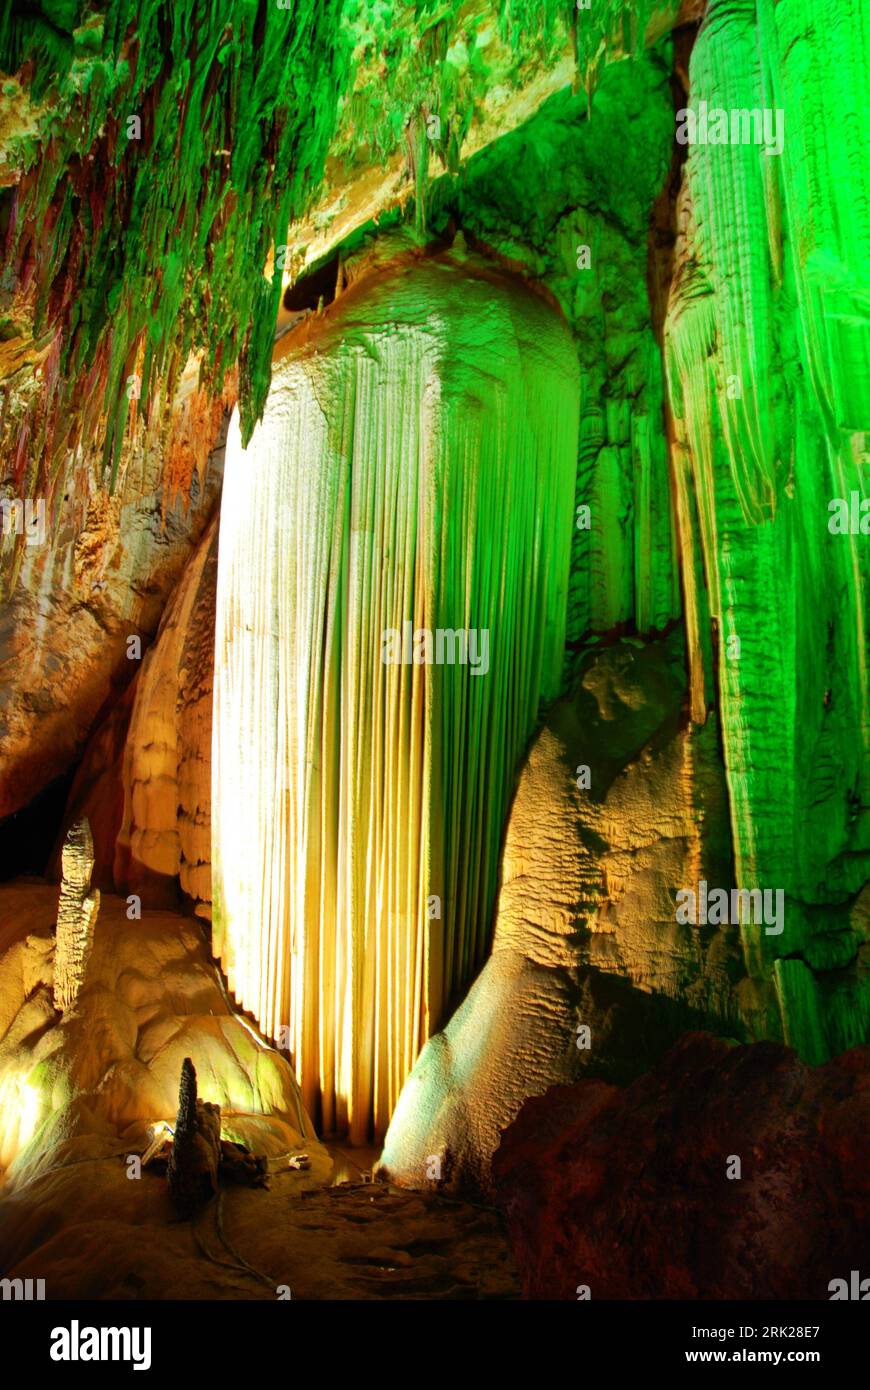 Bildnummer: 53153734  Datum: 28.04.2009  Copyright: imago/Xinhua  Photo taken on April 24 shows the stalactite in the Furong Karst Cave in Wulong County of southwest China s Chongqing. kbdig   Tropfstein in der Furong Karst Höhle in Wulong County of Südwest China s Chongqing. Tropfsteinhöhle hoch    Bildnummer 53153734 Date 28 04 2009 Copyright Imago XINHUA Photo Taken ON April 24 Shows The stalactite in The Furong Karst Cave in Wulong County of Southwest China S Chongqing Kbdig Stalactite in the Furong Karst Cave in Wulong County of Southwest China S Chongqing Cave vertical Stock Photo